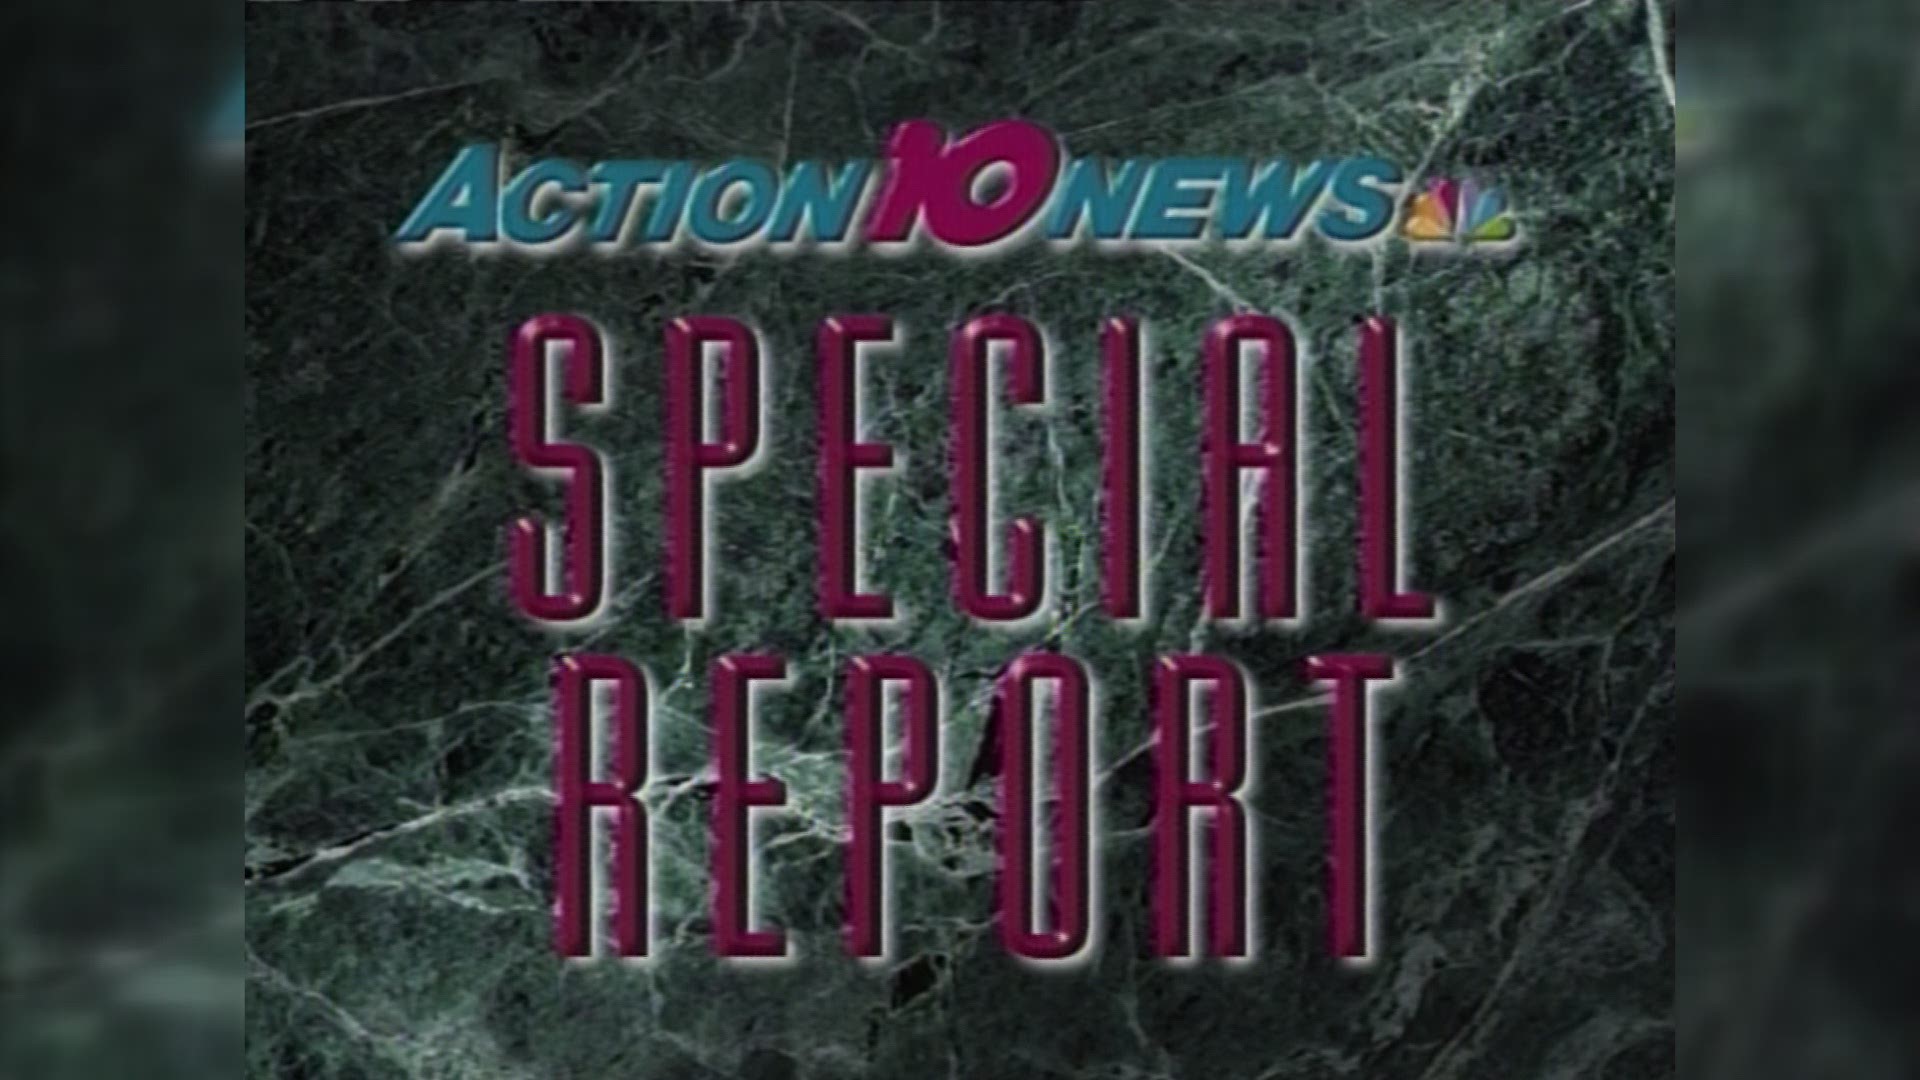 On March 5, 1997 Peyton Manning announced his decision to stay at Tennessee for his senior season. This is the Action 10News Special Report that aired that day, carrying Peyton's announcement live on WBIR.